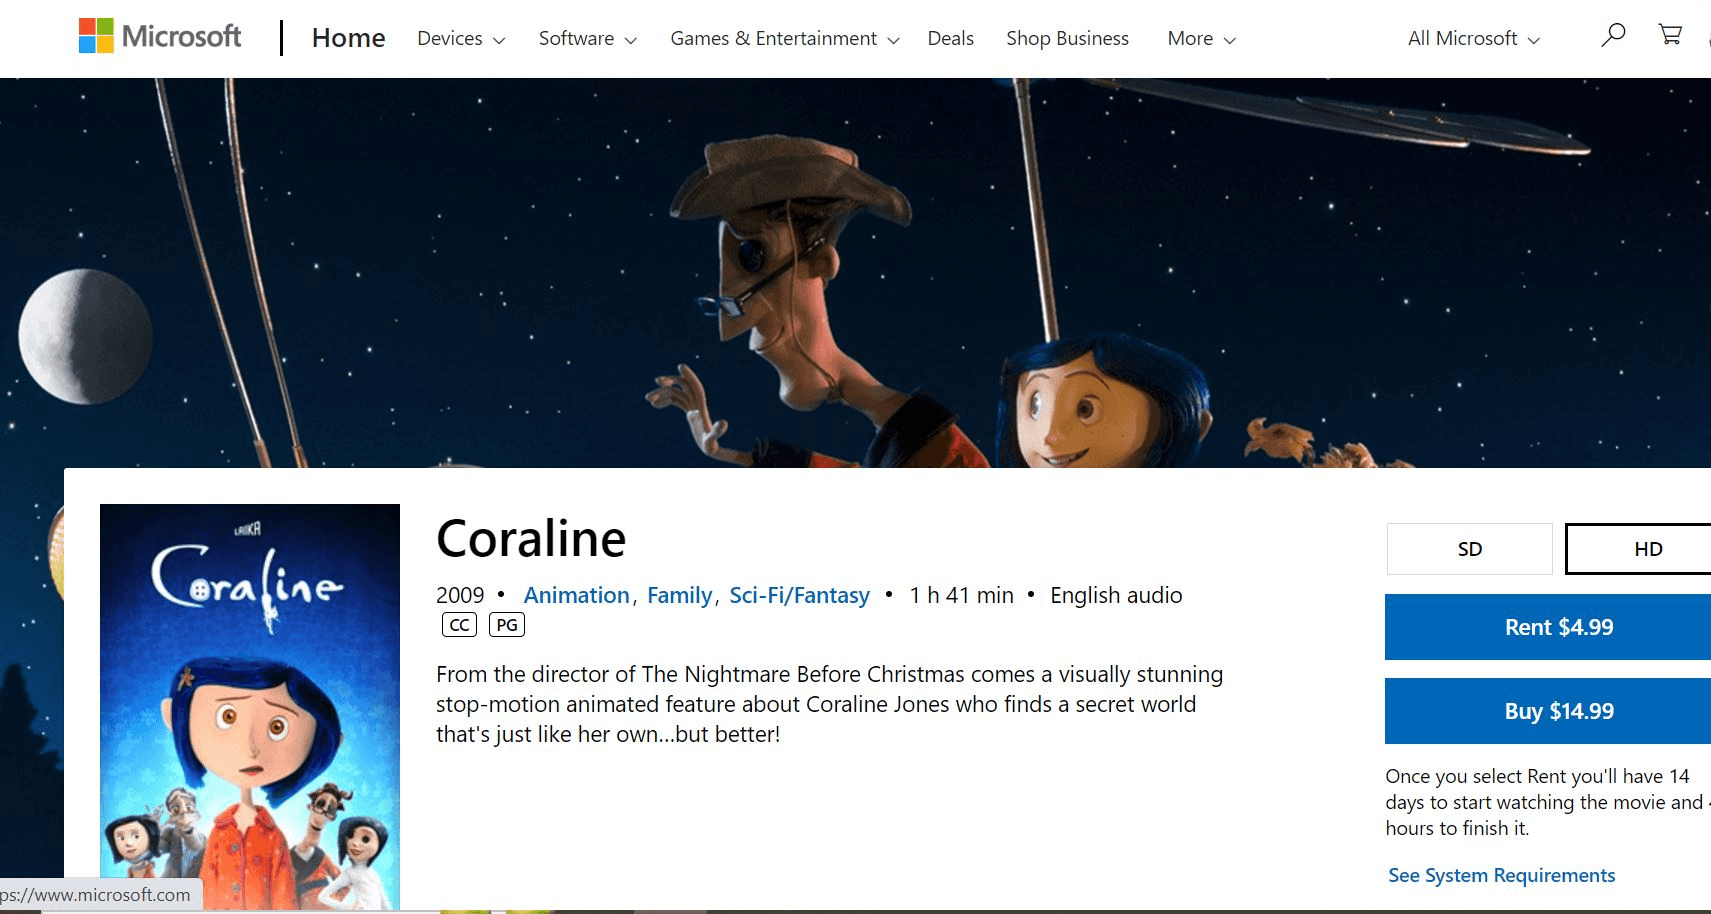 Coraline on the Microsoft store.